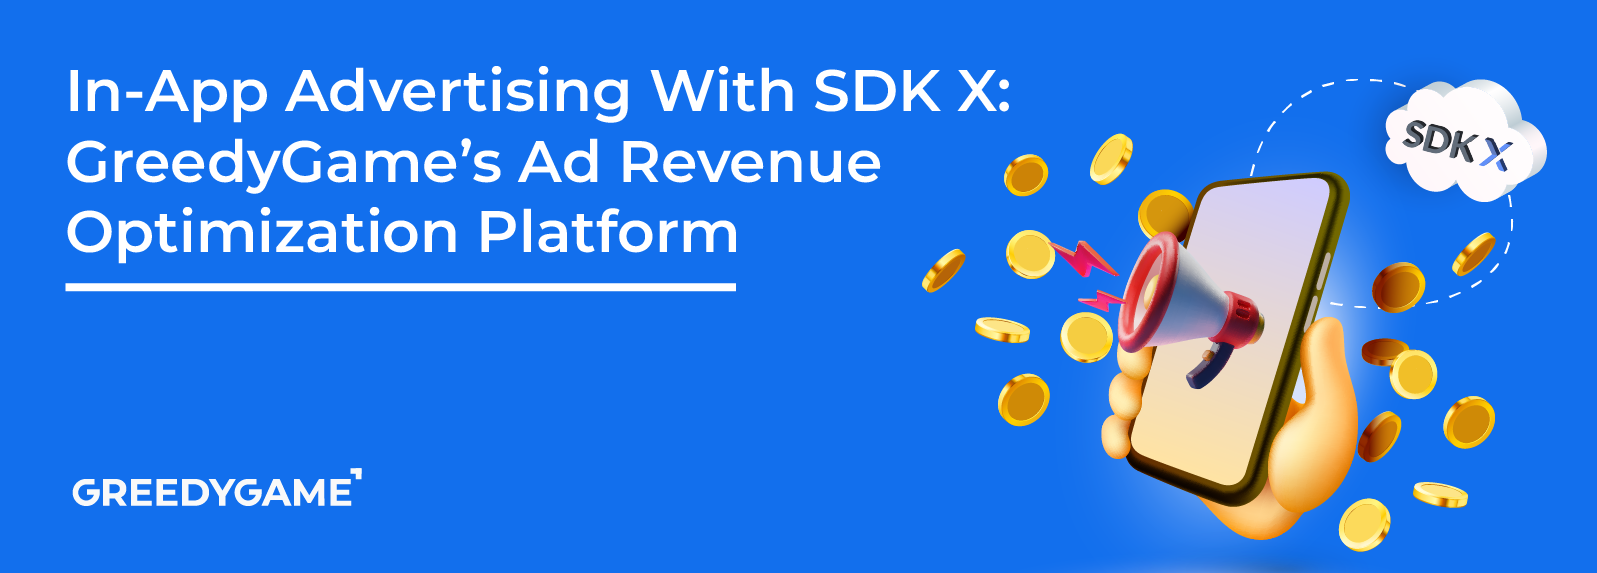 How to improve in-app advertising with SDK X